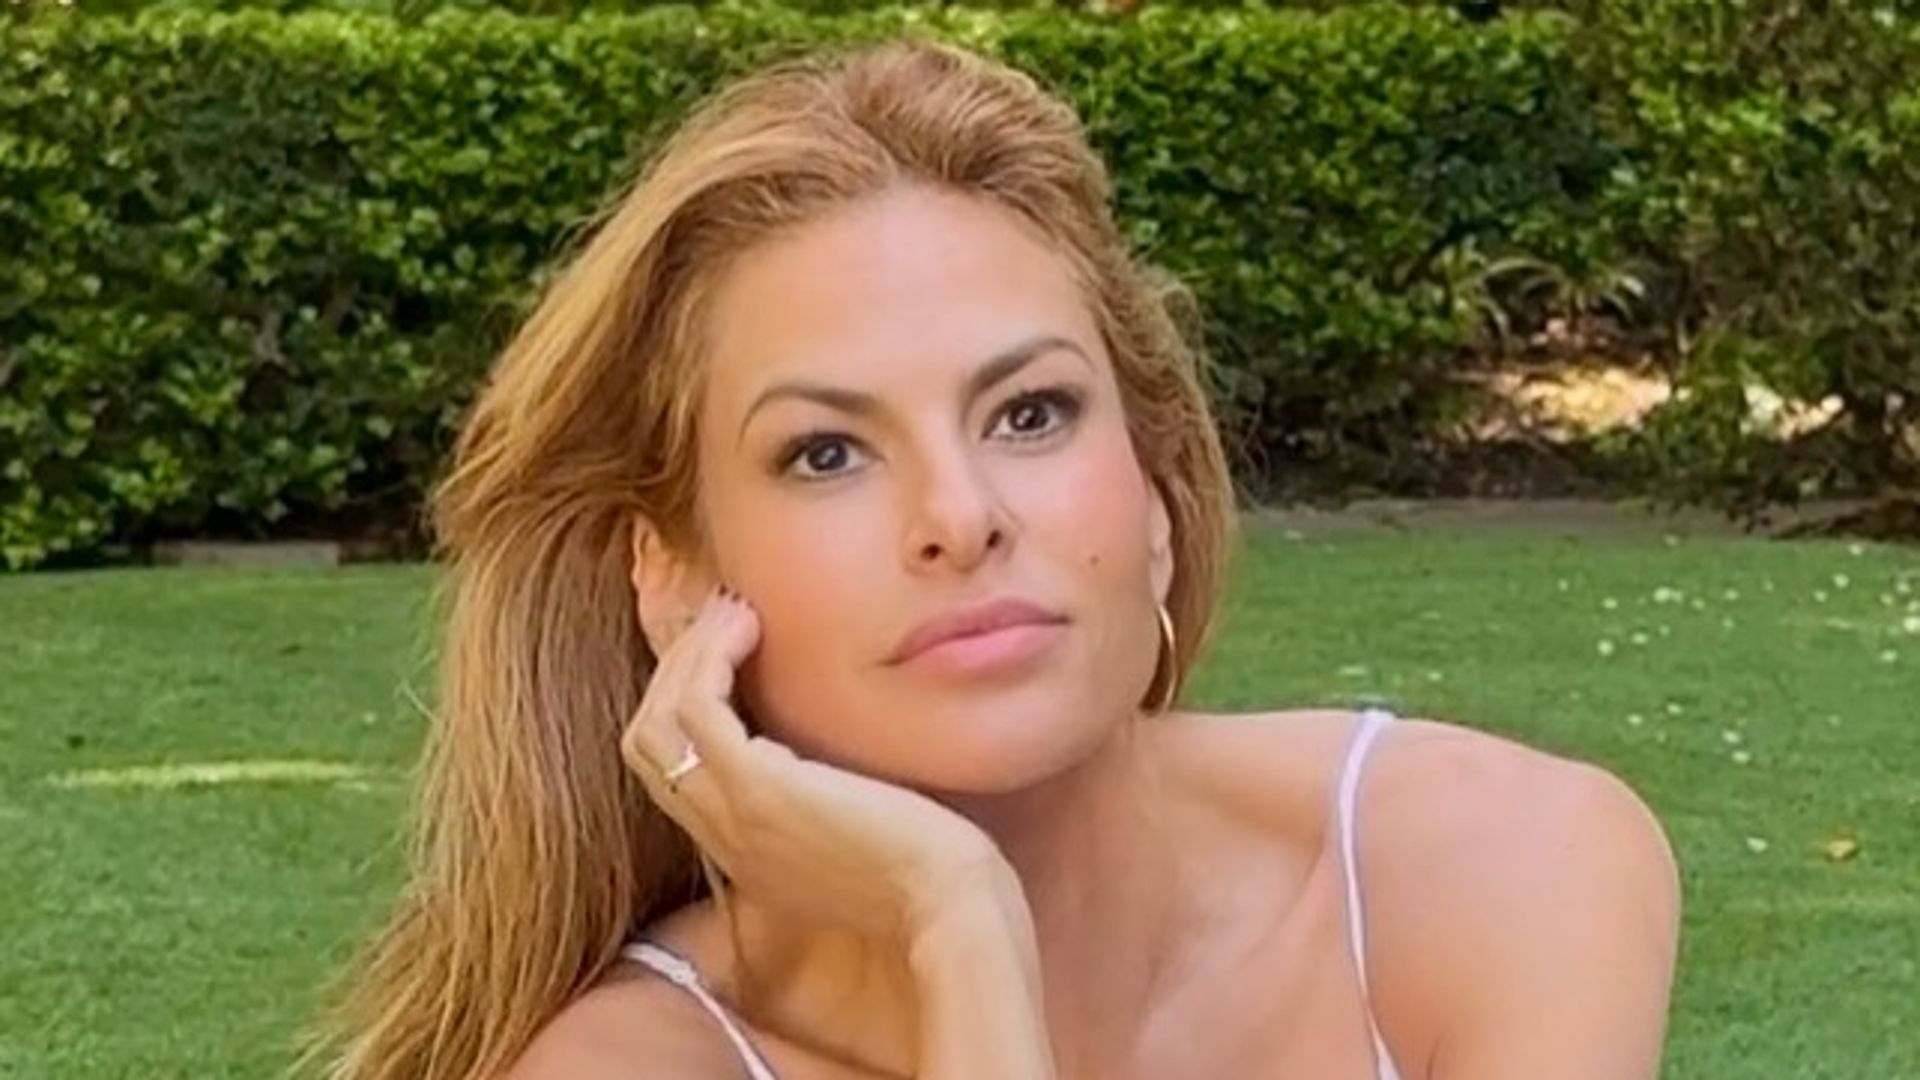 Eva Mendes says 'my kids take everything' as she makes very real parenting confession